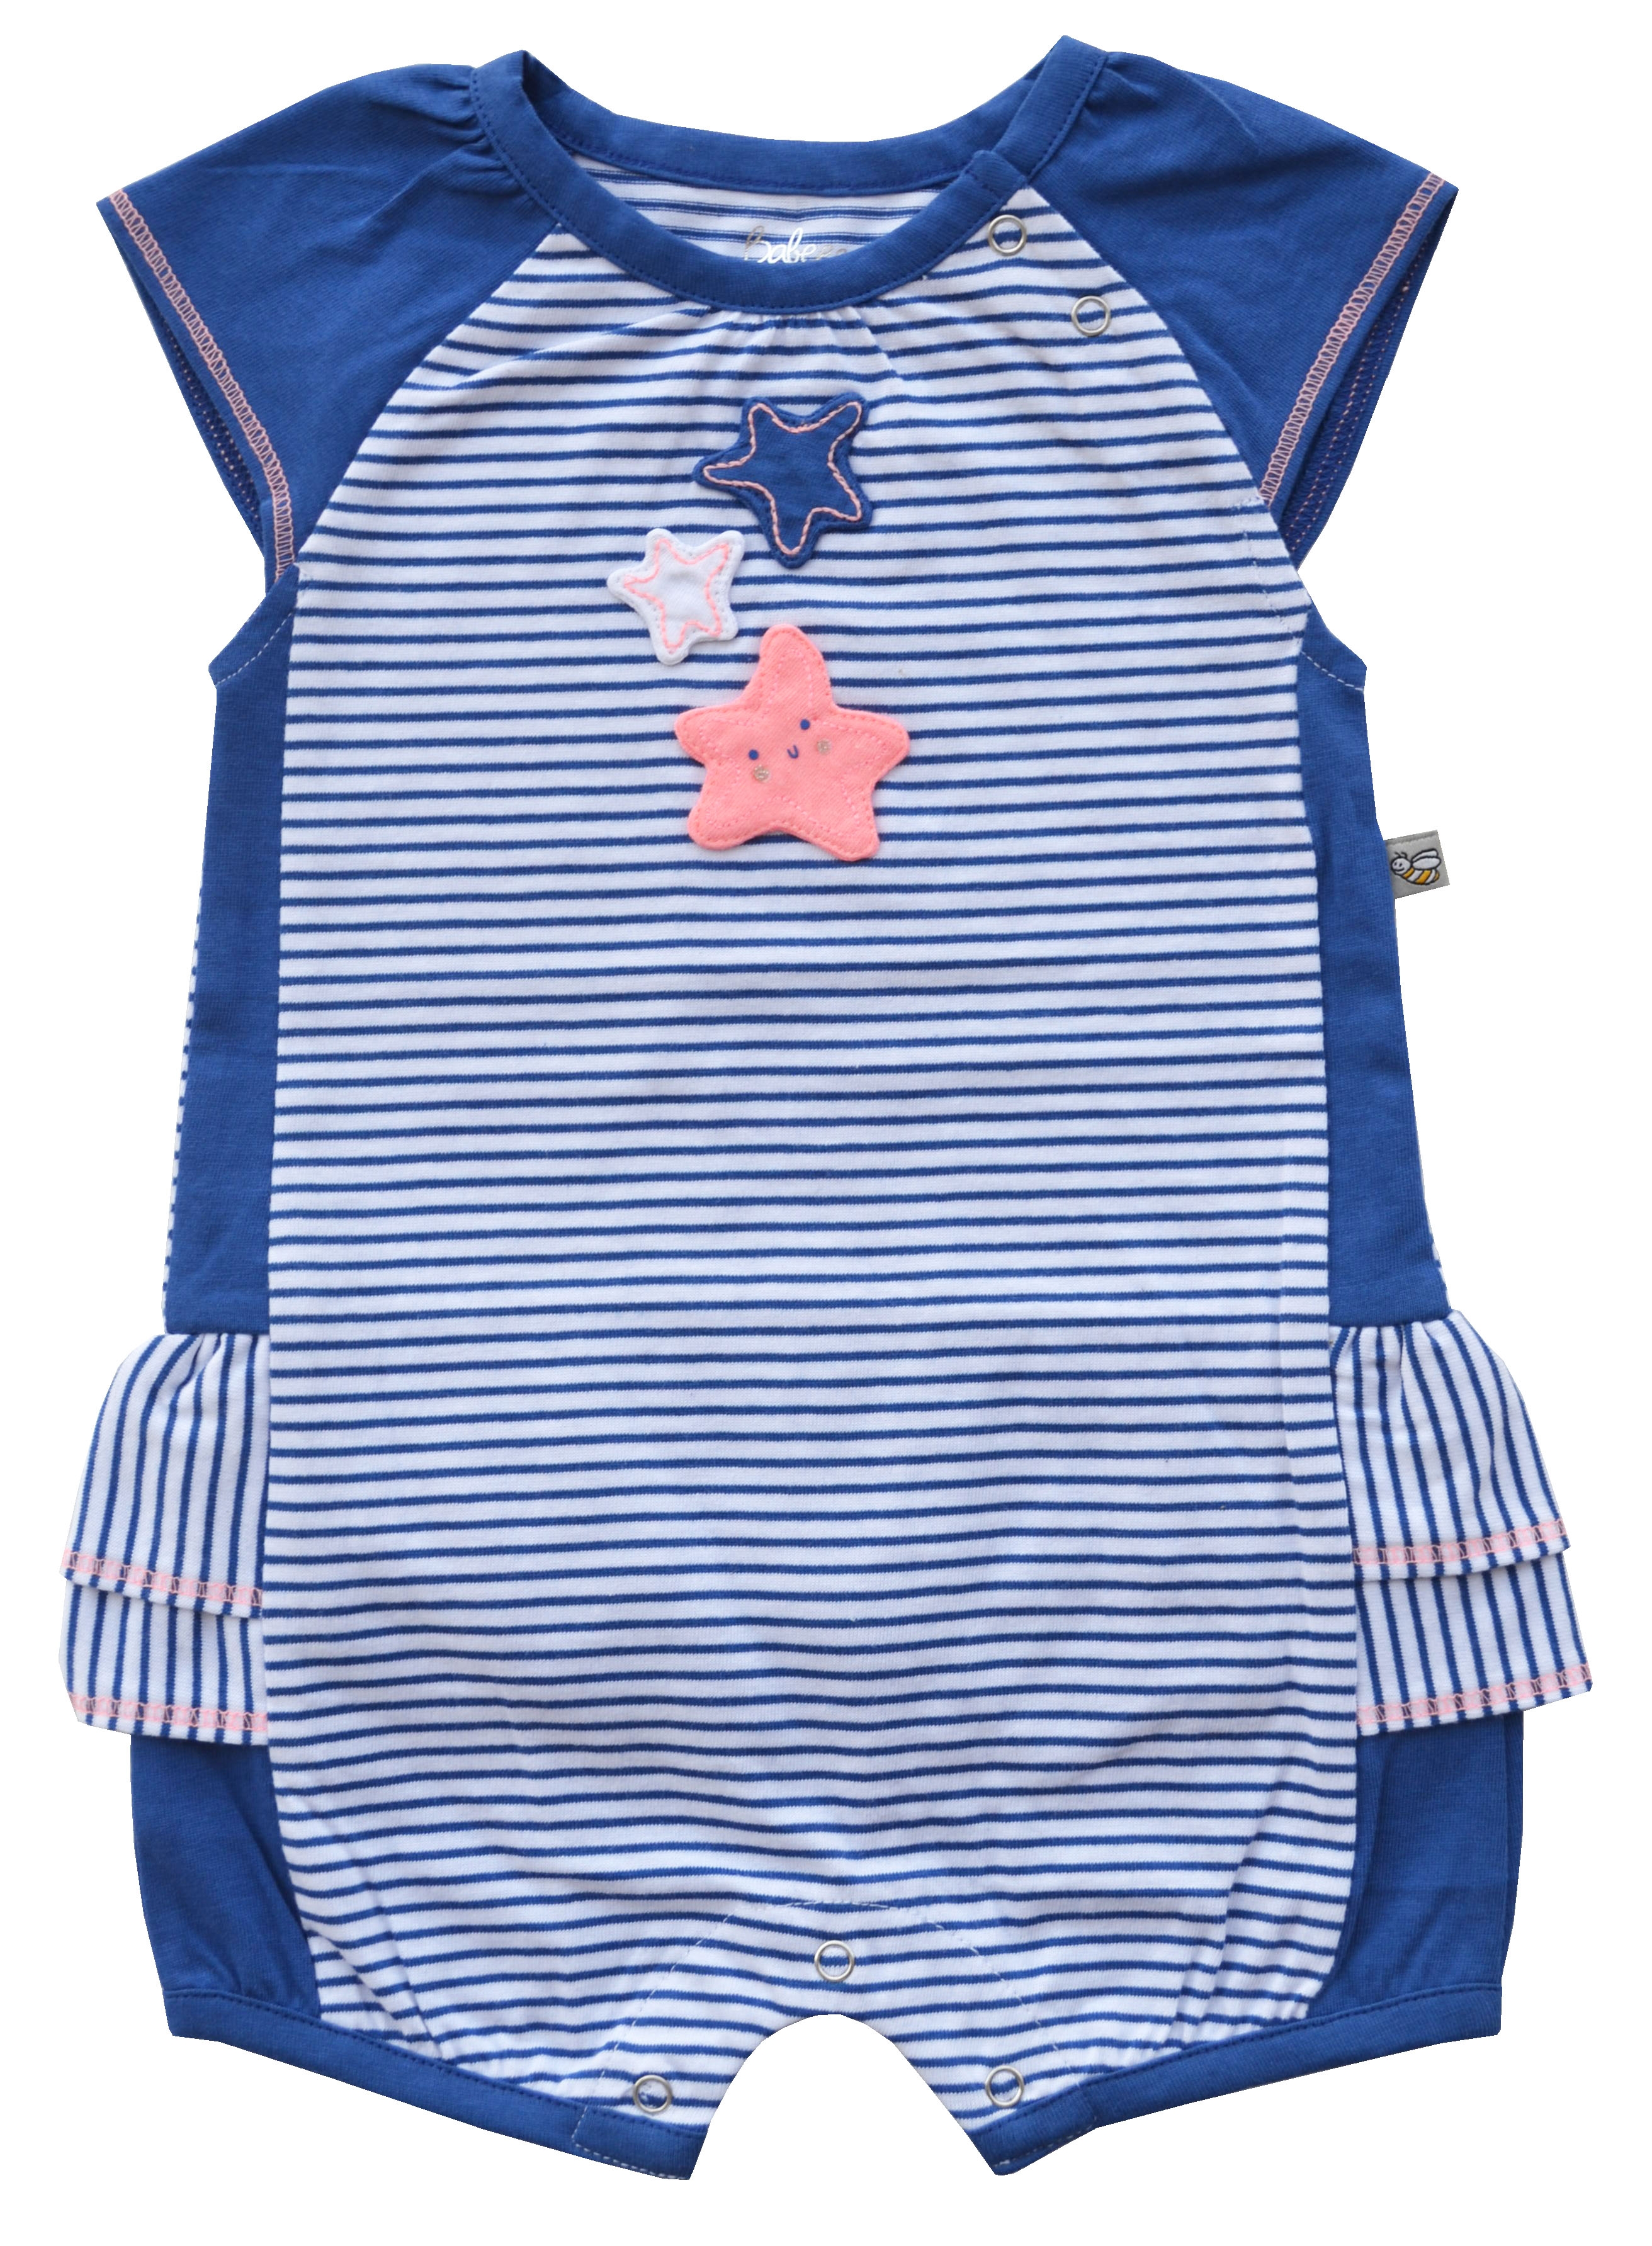 Blue Striped Short Romper With Star Applique (100% Cotton Jersey)